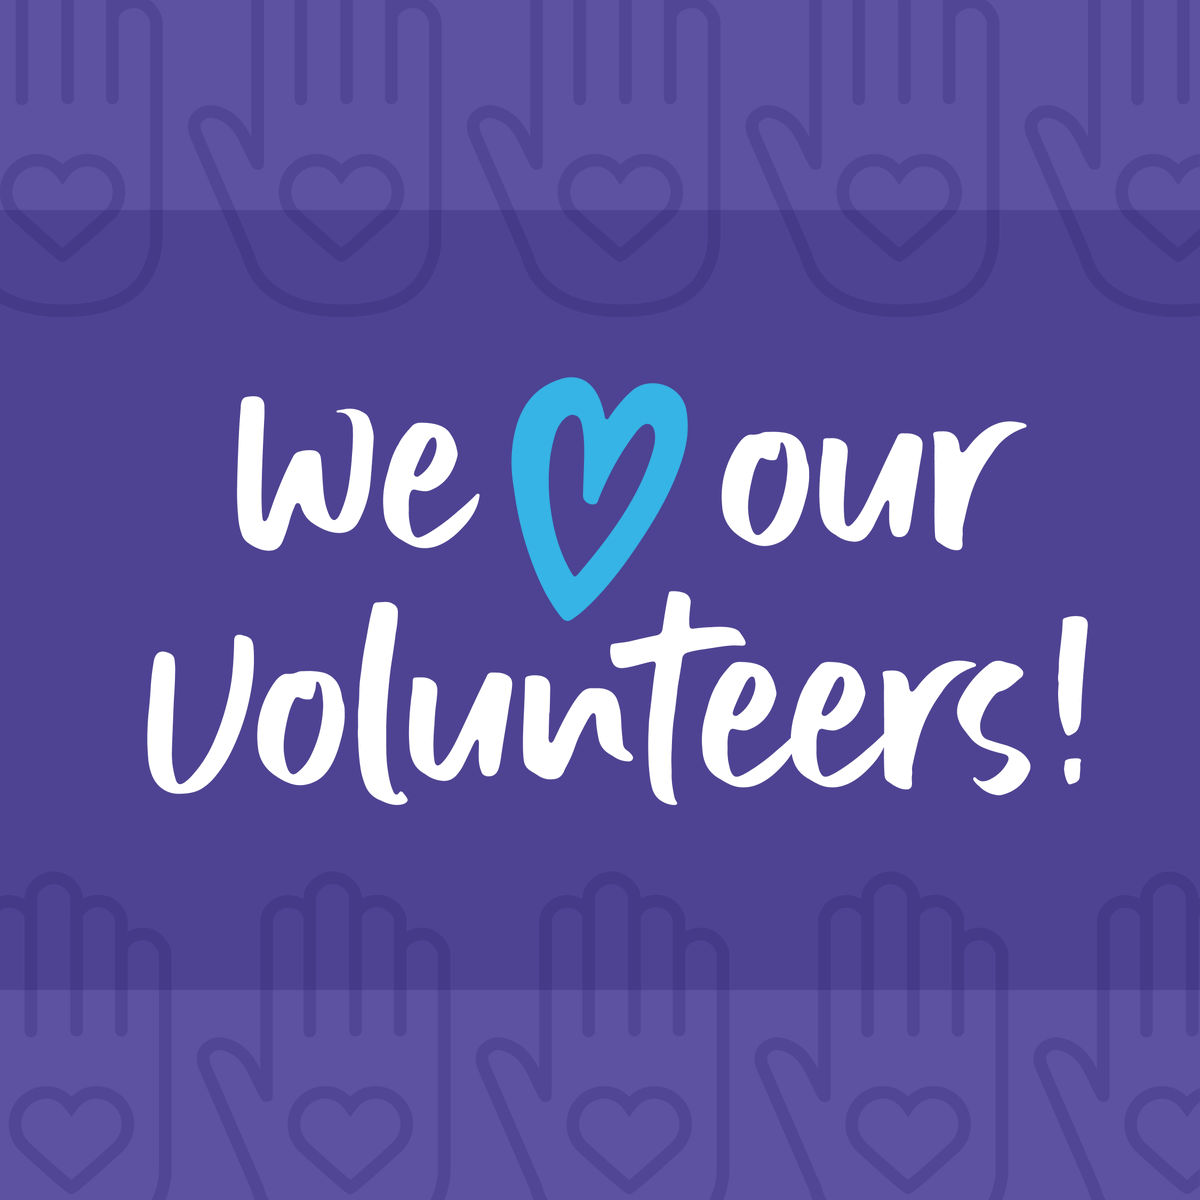 Happy Volunteer Week! Sigma extends a heartfelt thank you to the many volunteers who have helped grow the organization on a local, regional, and international level. We are grateful for you! #SigmaVolunteer